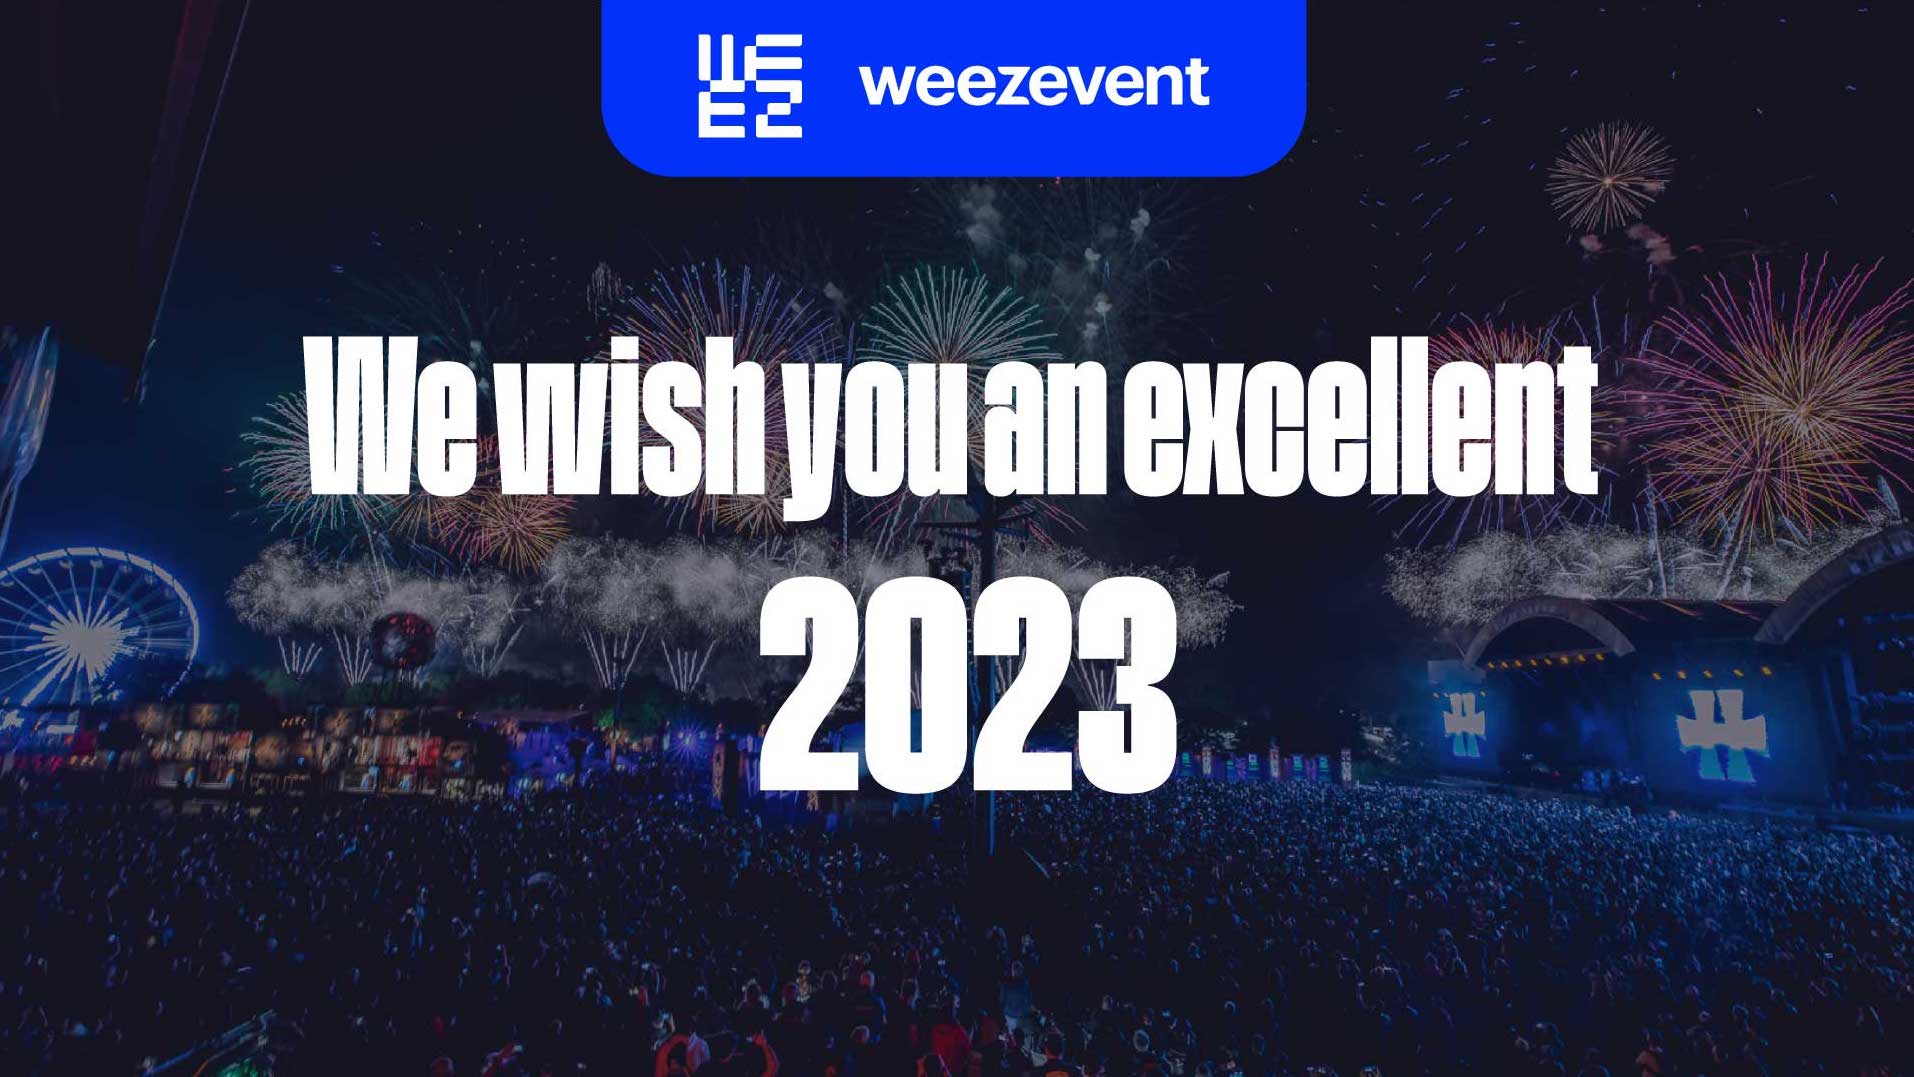 Weezevent wishes you the best for 2023!